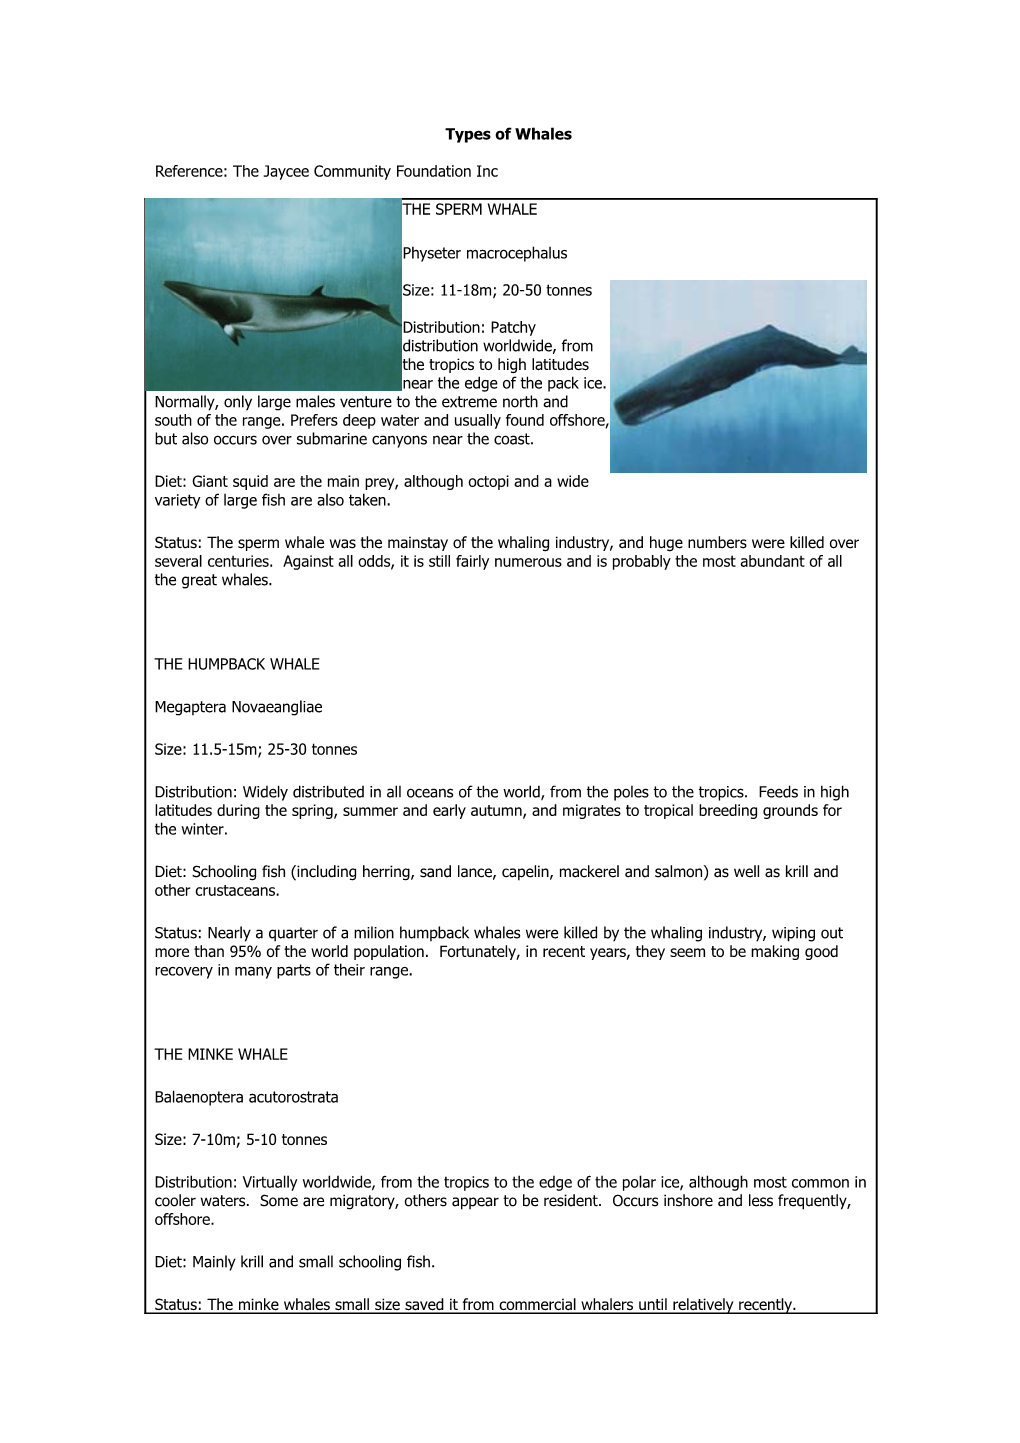 Types of Whales (The Jaycee Community Foundation Inc)